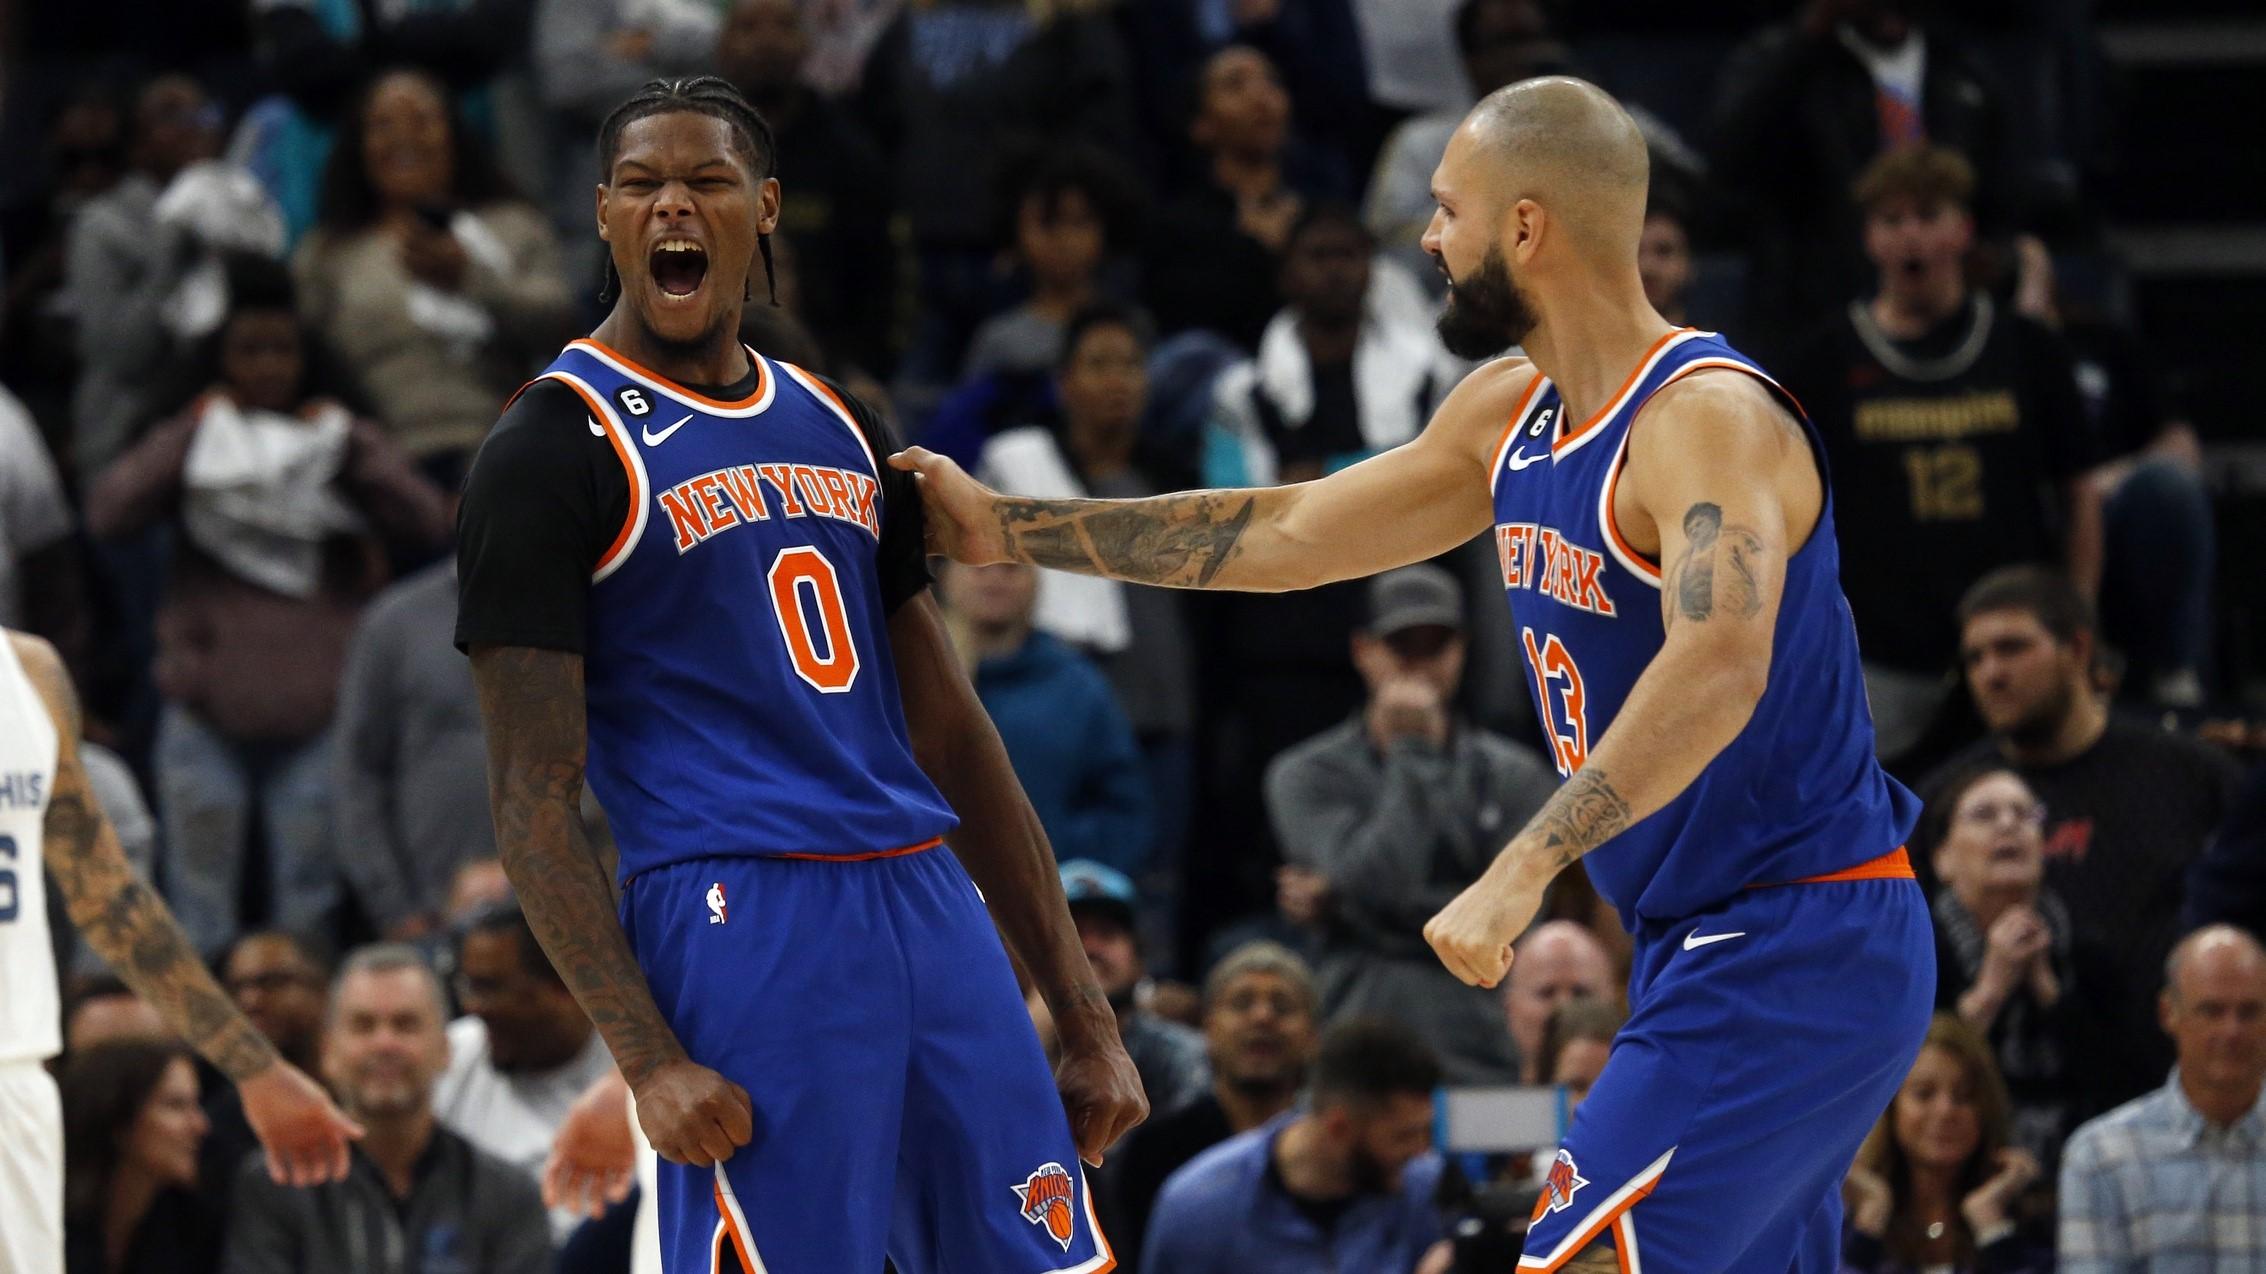 Oct 19, 2022; Memphis, Tennessee, USA; New York Knicks forward Cam Reddish (0) reacts with guard Evan Fournier (13) after making a three point basket with 3.3 seconds left in regulation against the Memphis Grizzlies at FedExForum. / Petre Thomas-USA TODAY Sports